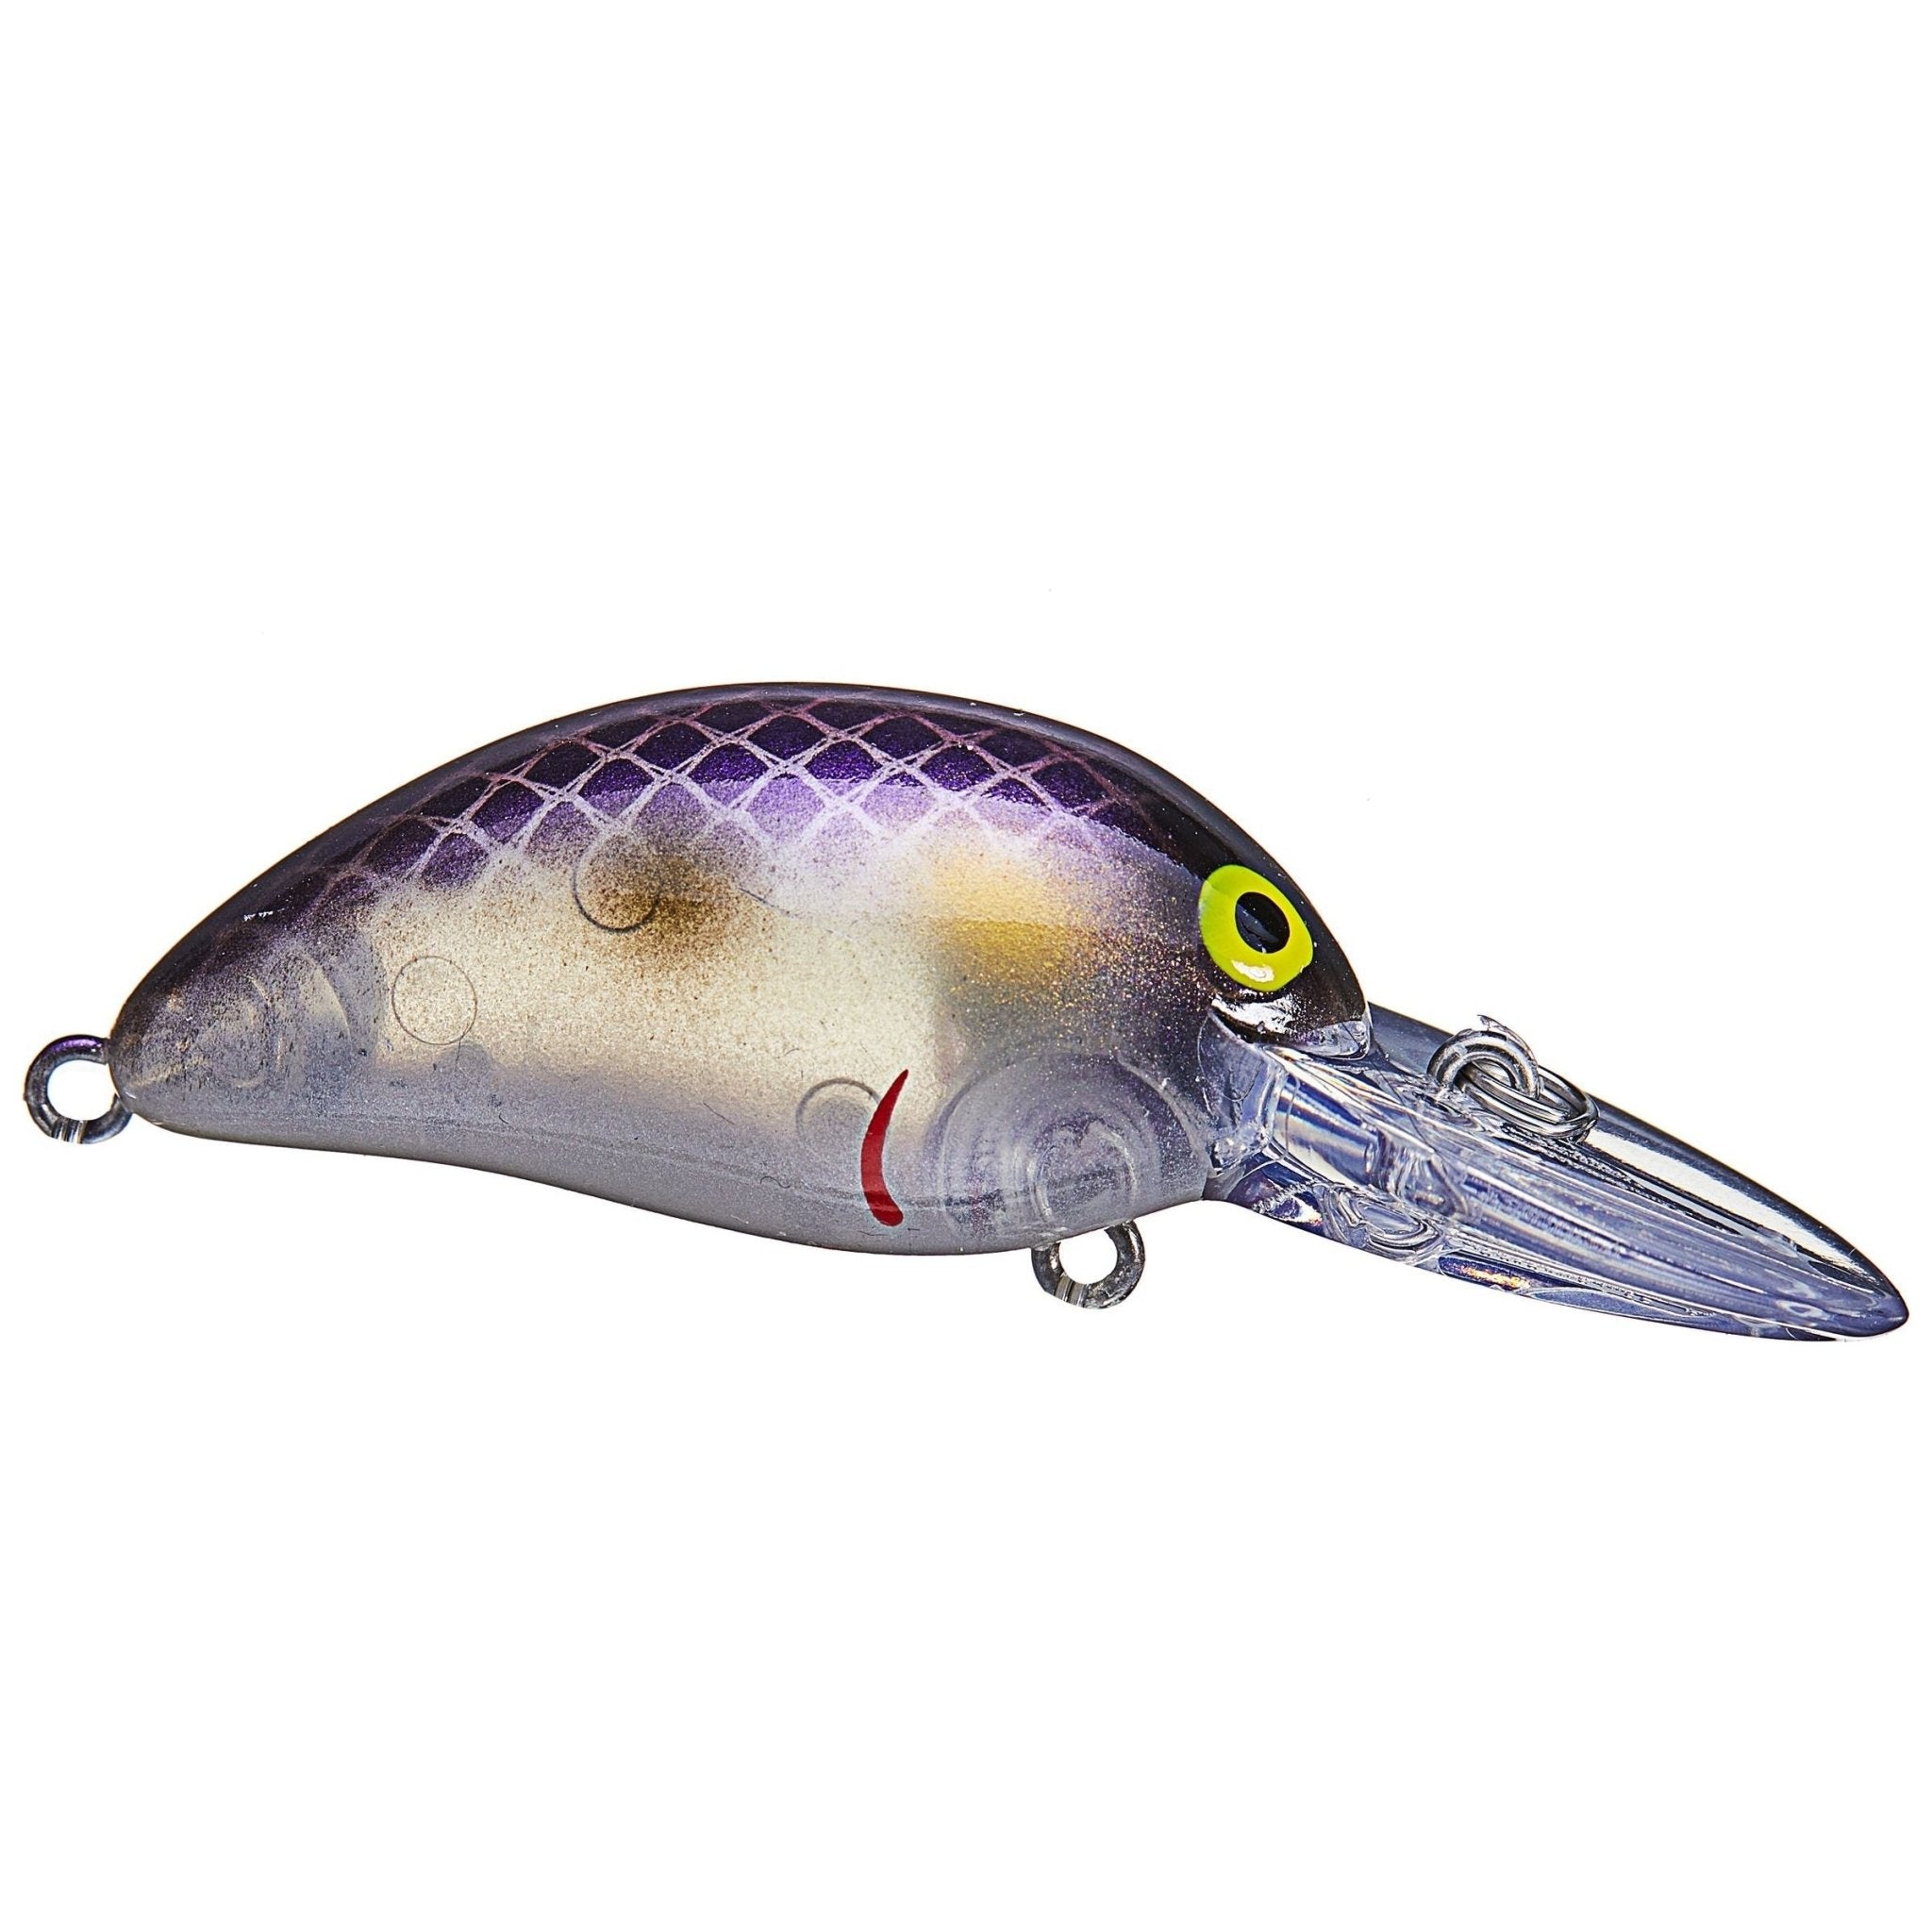 Bomber Lures Model A 04 2-1/8 5/16 Oz